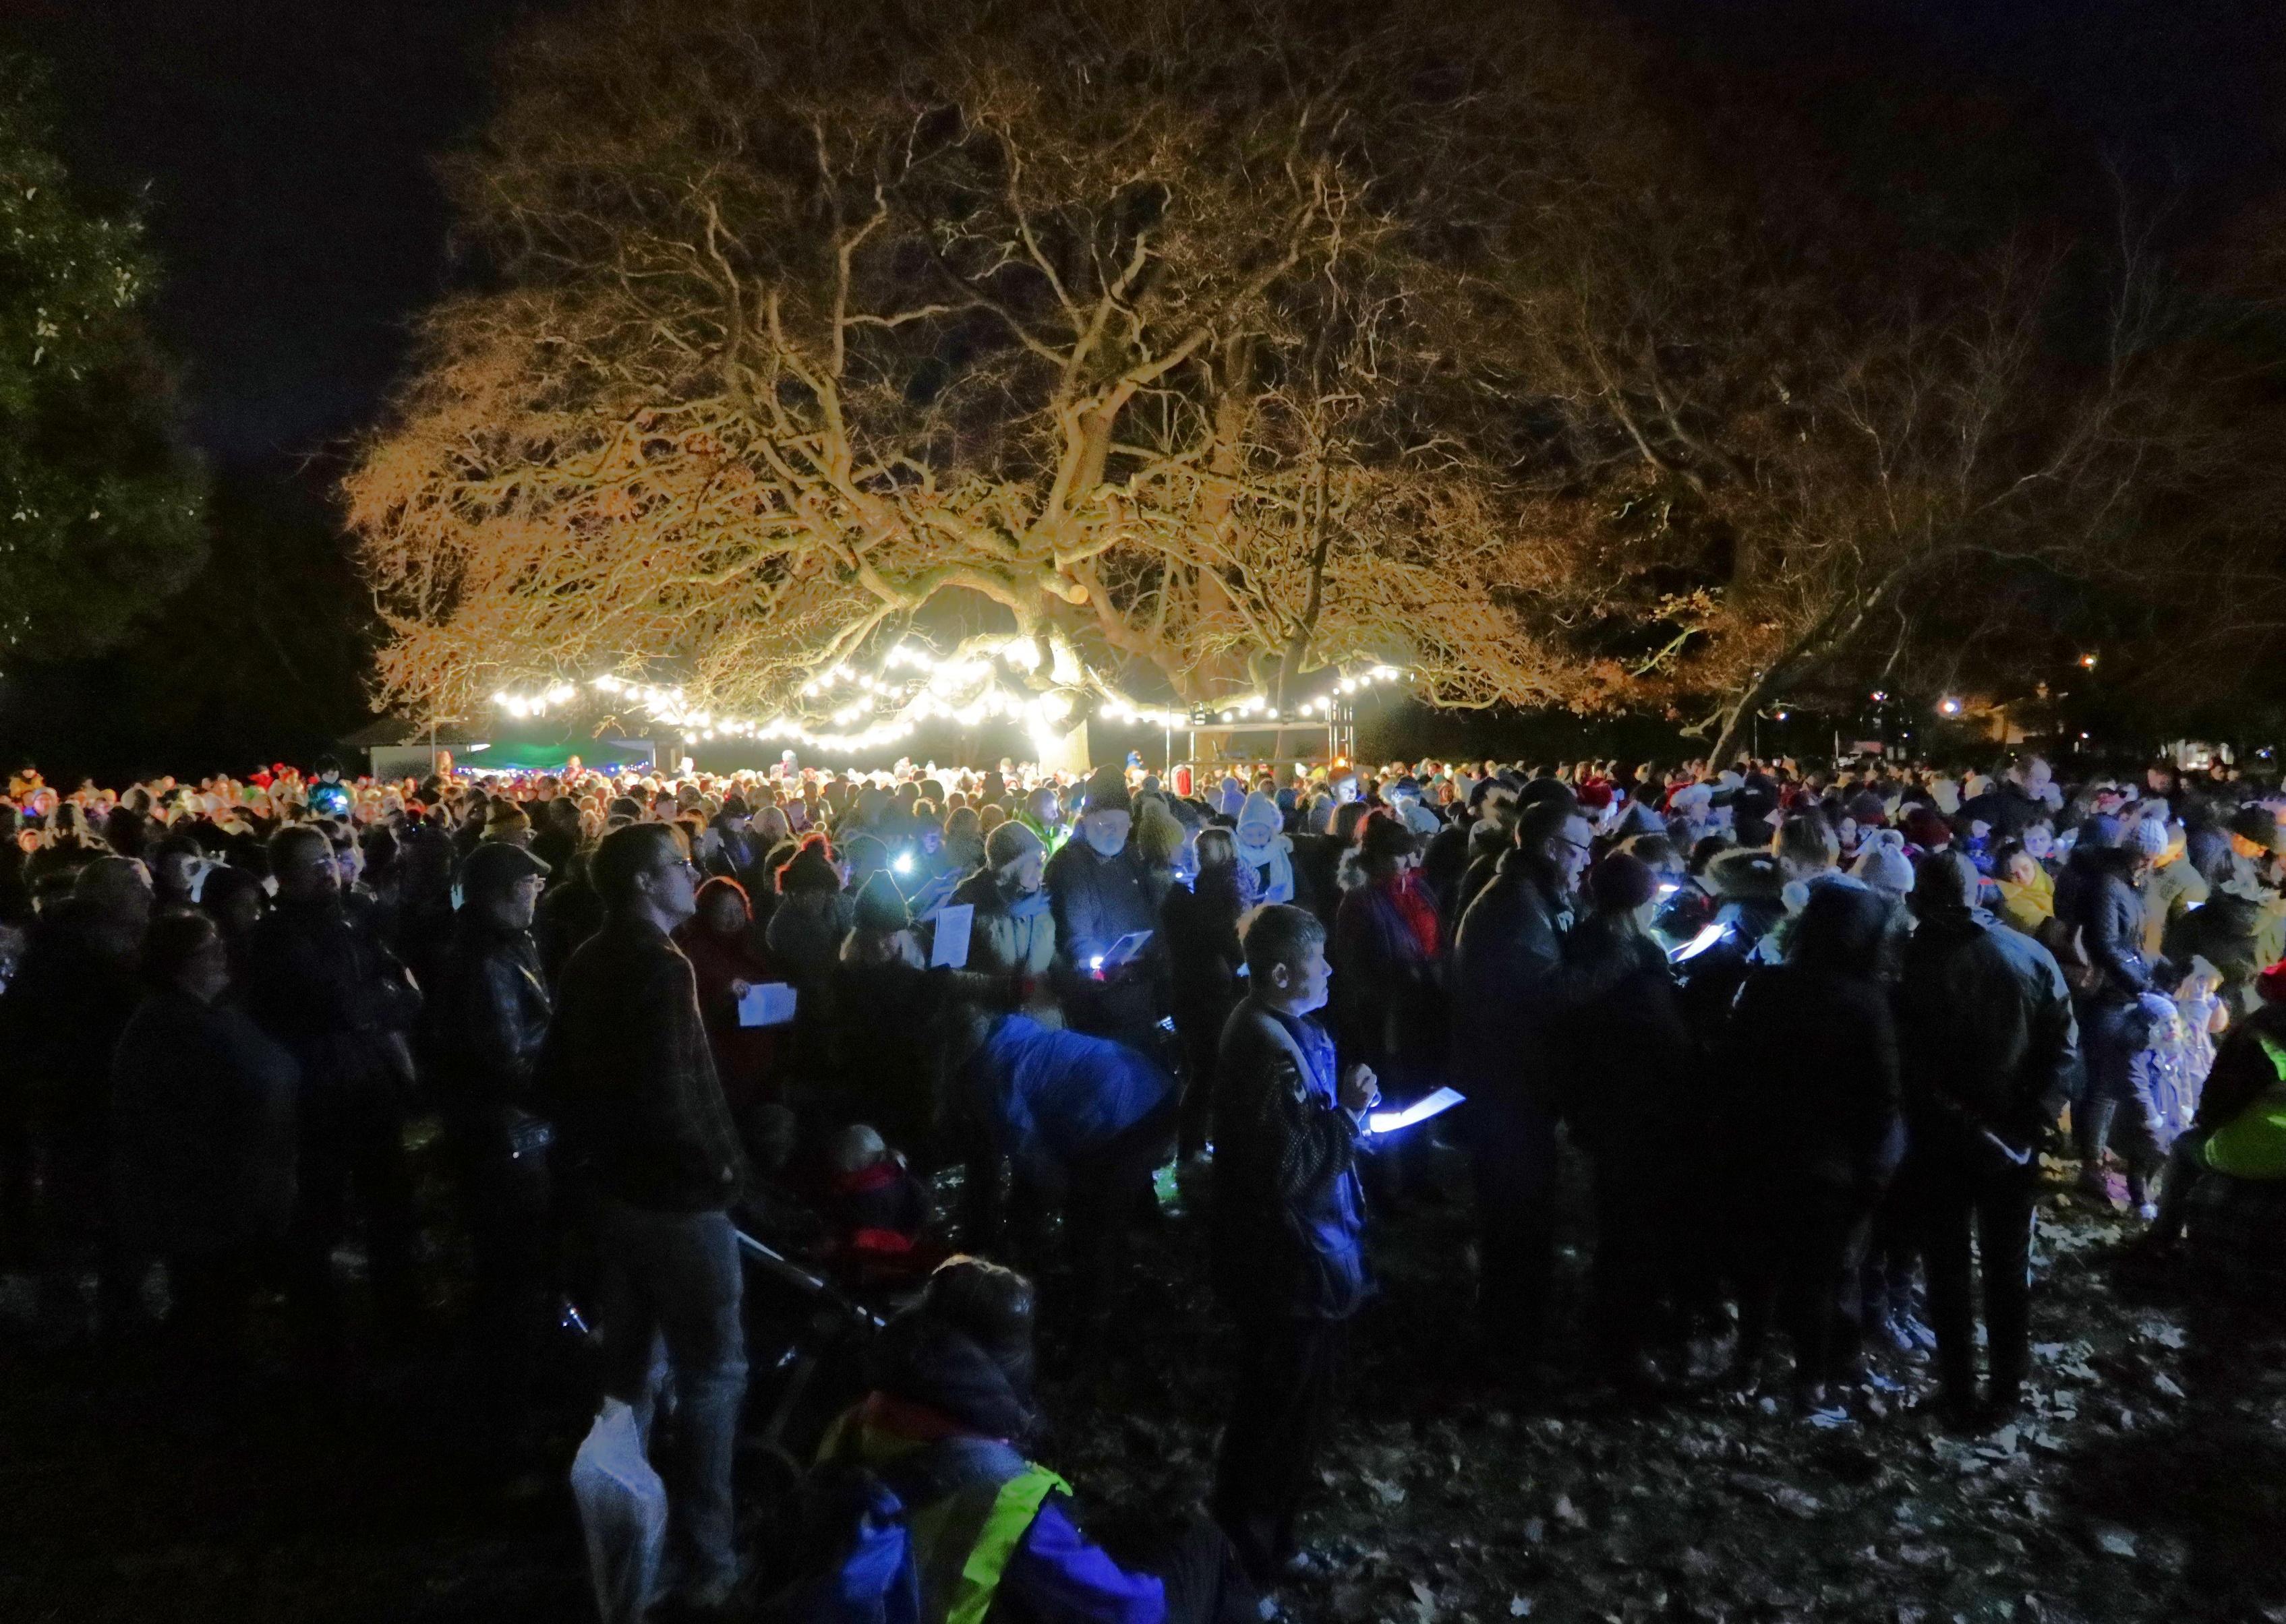 The Bandstand Lawn was transformed into a winter wonderland for the Carol's in the Park event on Sunday (December 1) SUS-190312-174609001